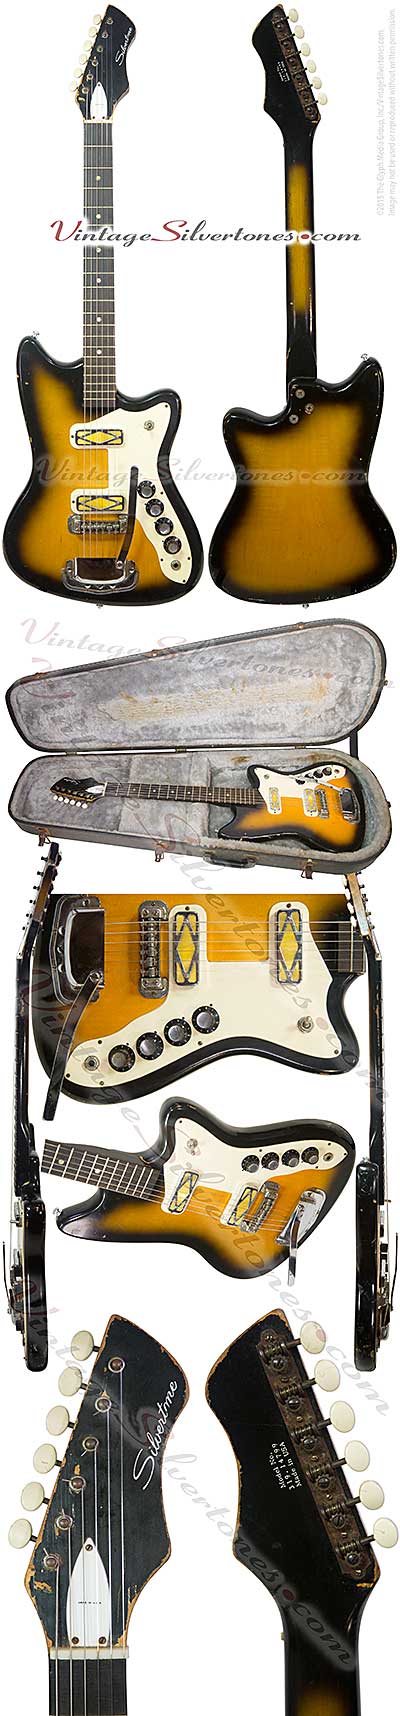 Silvertone -Harmony-made - 1479 solid body electric guitar with 1750 whammy bar double cutaway, tobaccoburst, 2 gold pickups made 1967